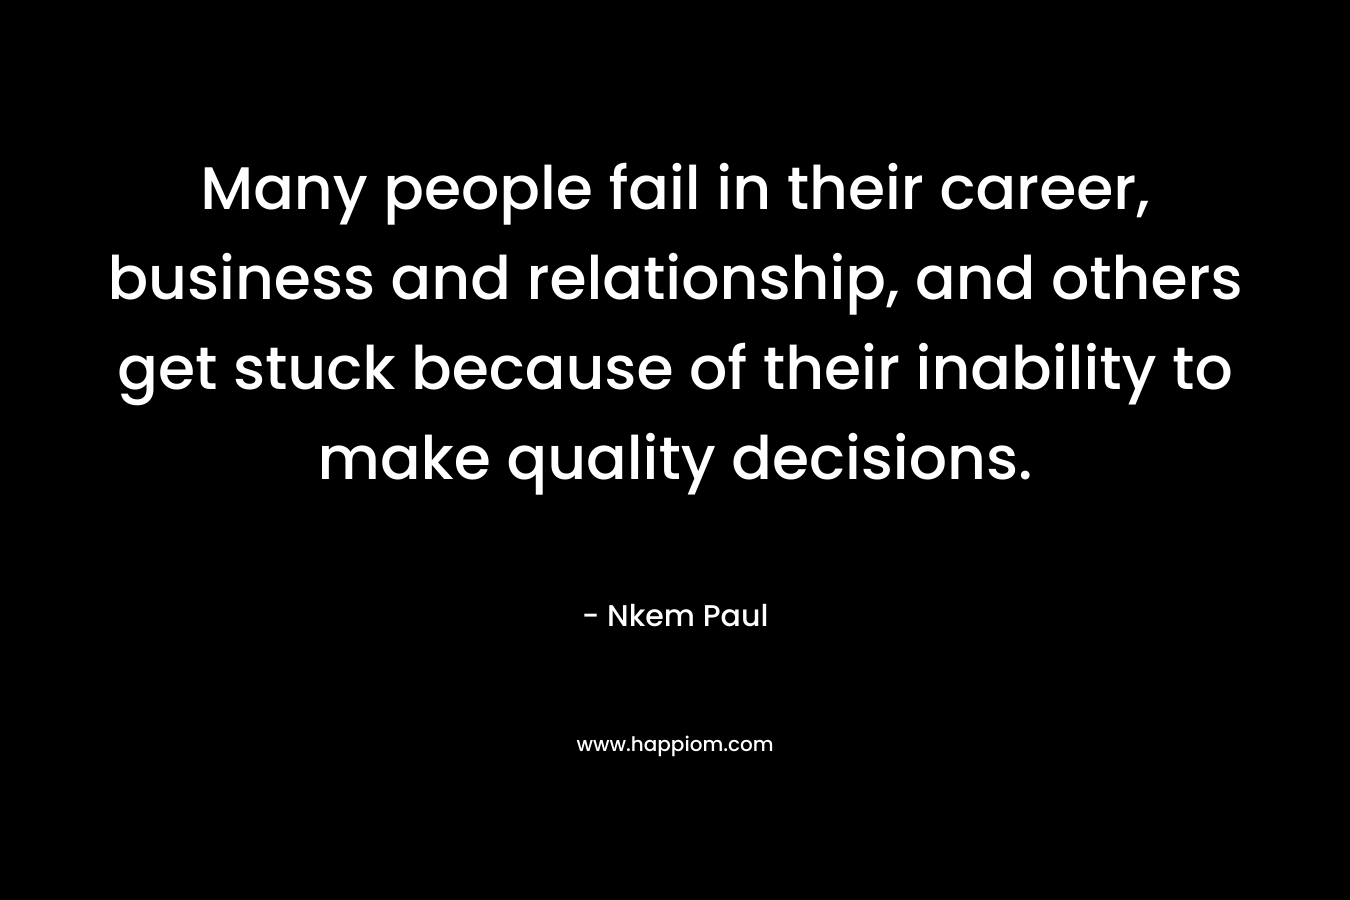 Many people fail in their career, business and relationship, and others get stuck because of their inability to make quality decisions. – Nkem Paul